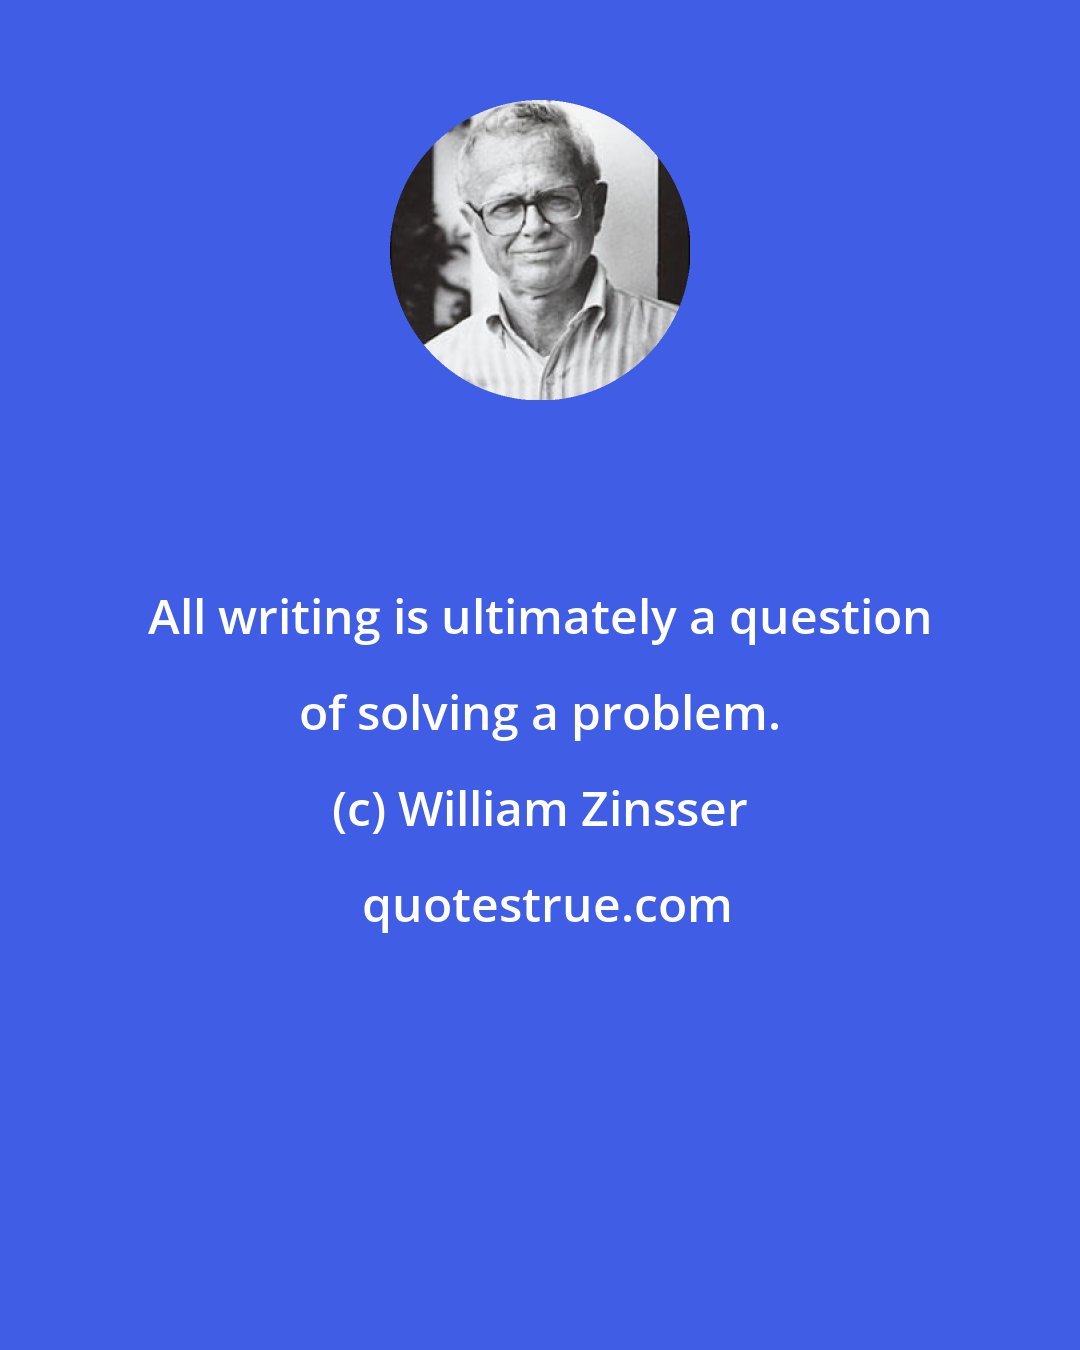 William Zinsser: All writing is ultimately a question of solving a problem.